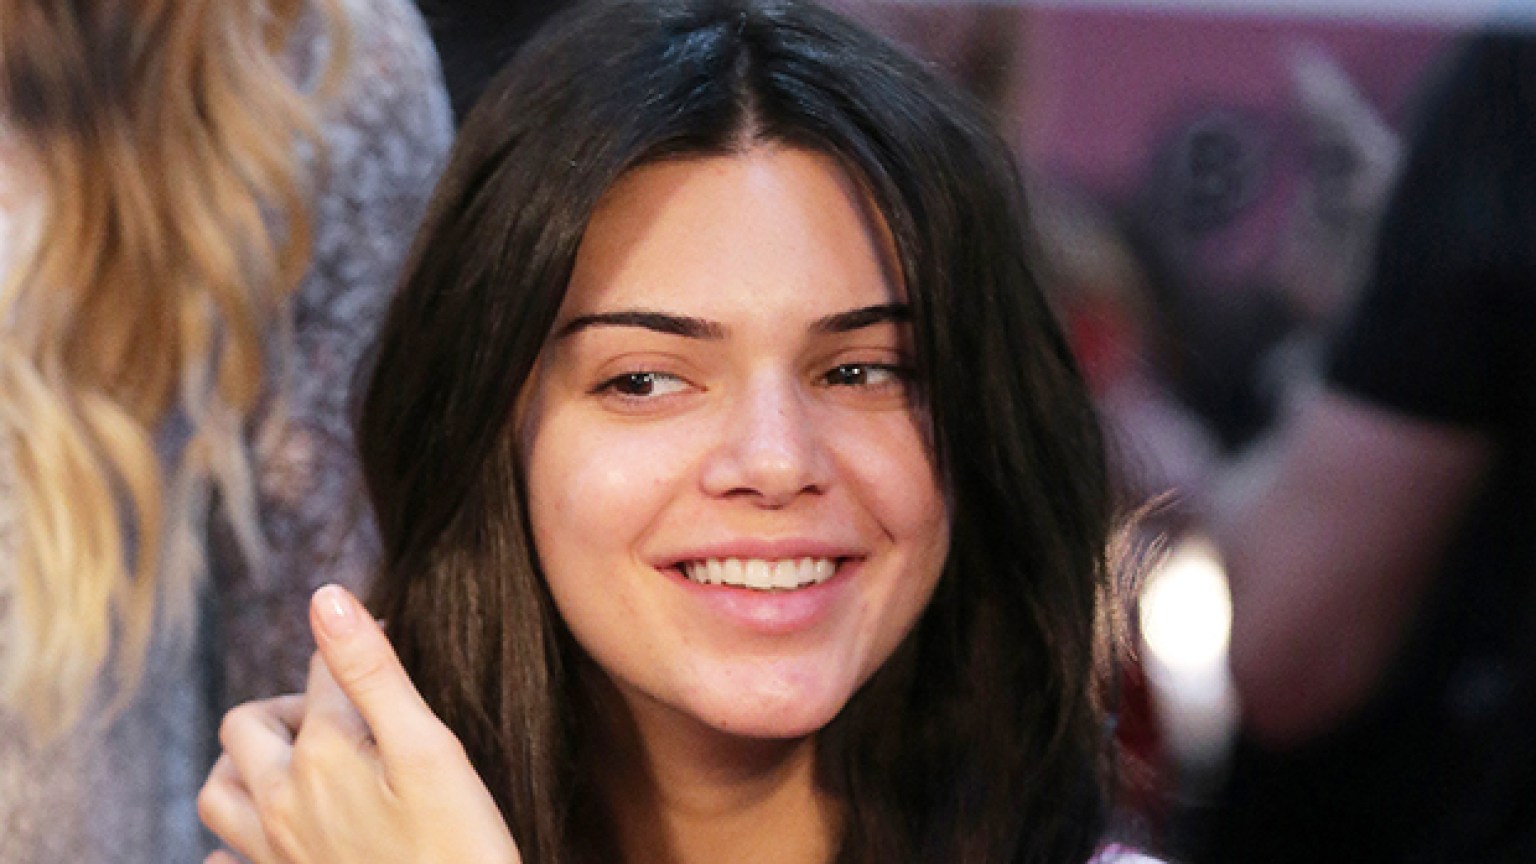 How To Treat Stress Acne Like Kendall Jenner: Dermatologist Tips ...